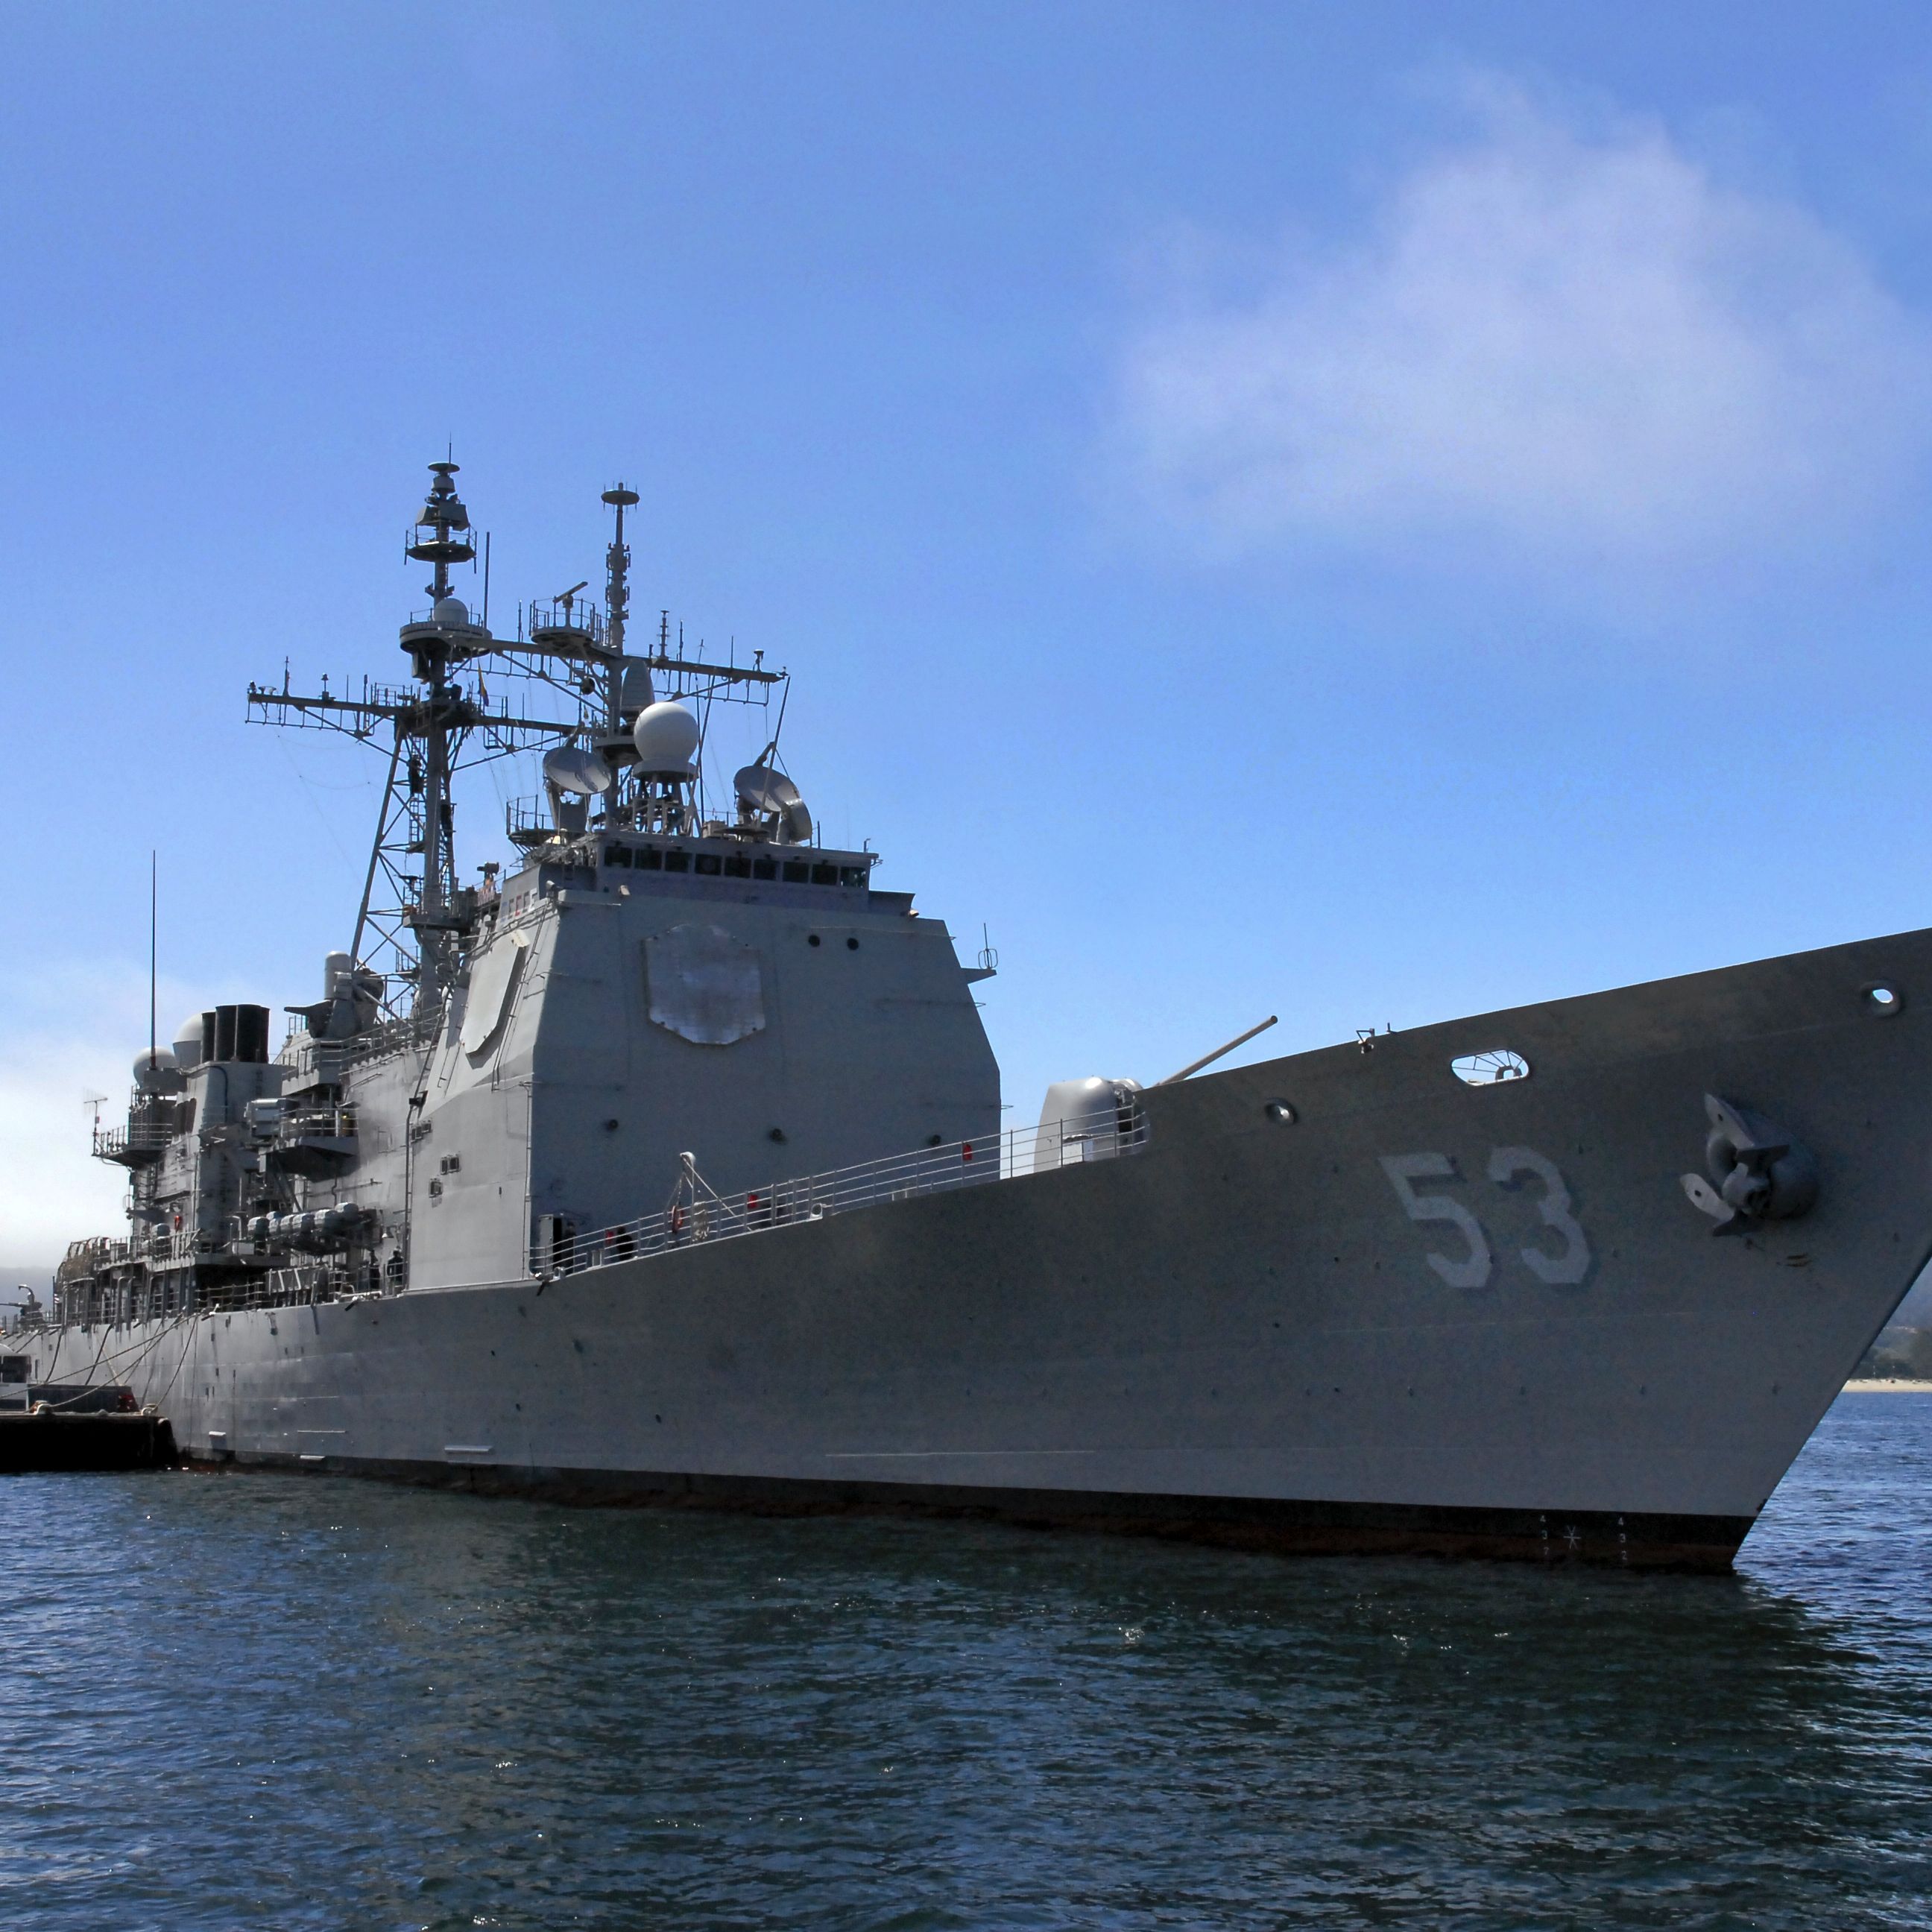 The U.S. Navy's Most Heavily Armed Ships Are Dwindling, With No Replacements in Sight